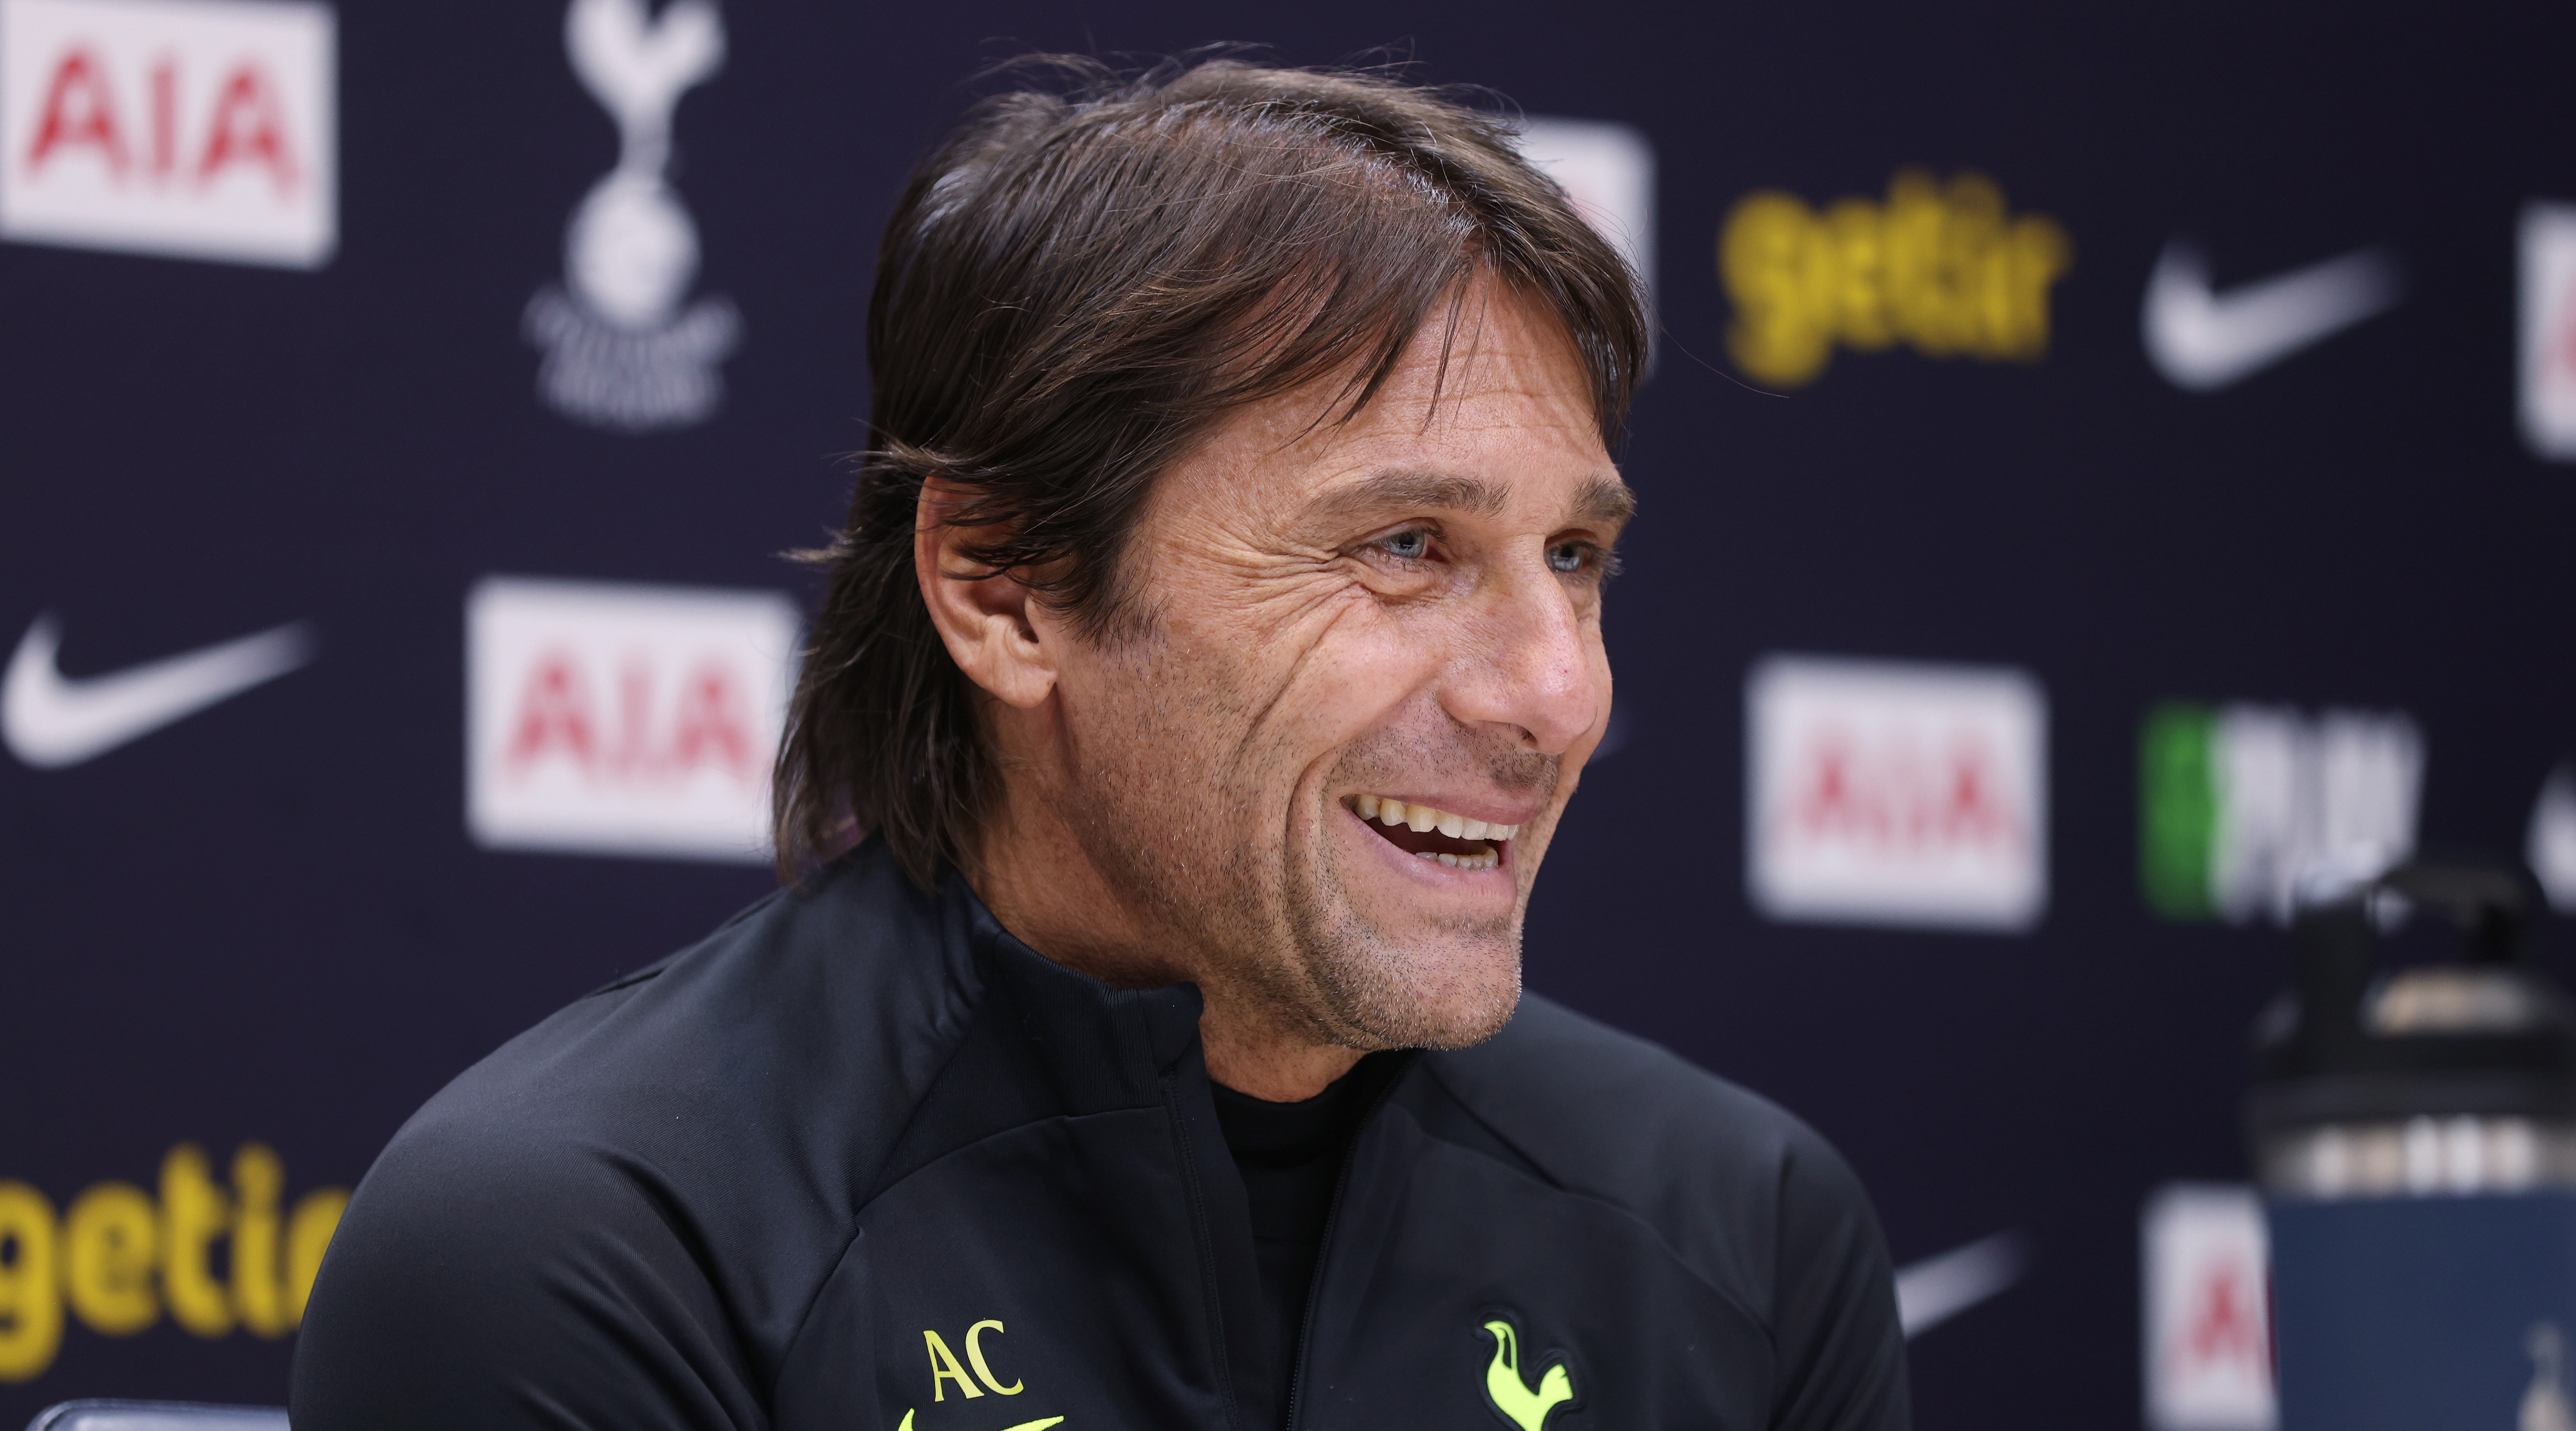 Tottenham Hotspur head coach Antonio Conte smiles during a press conference on January 3, 2023.